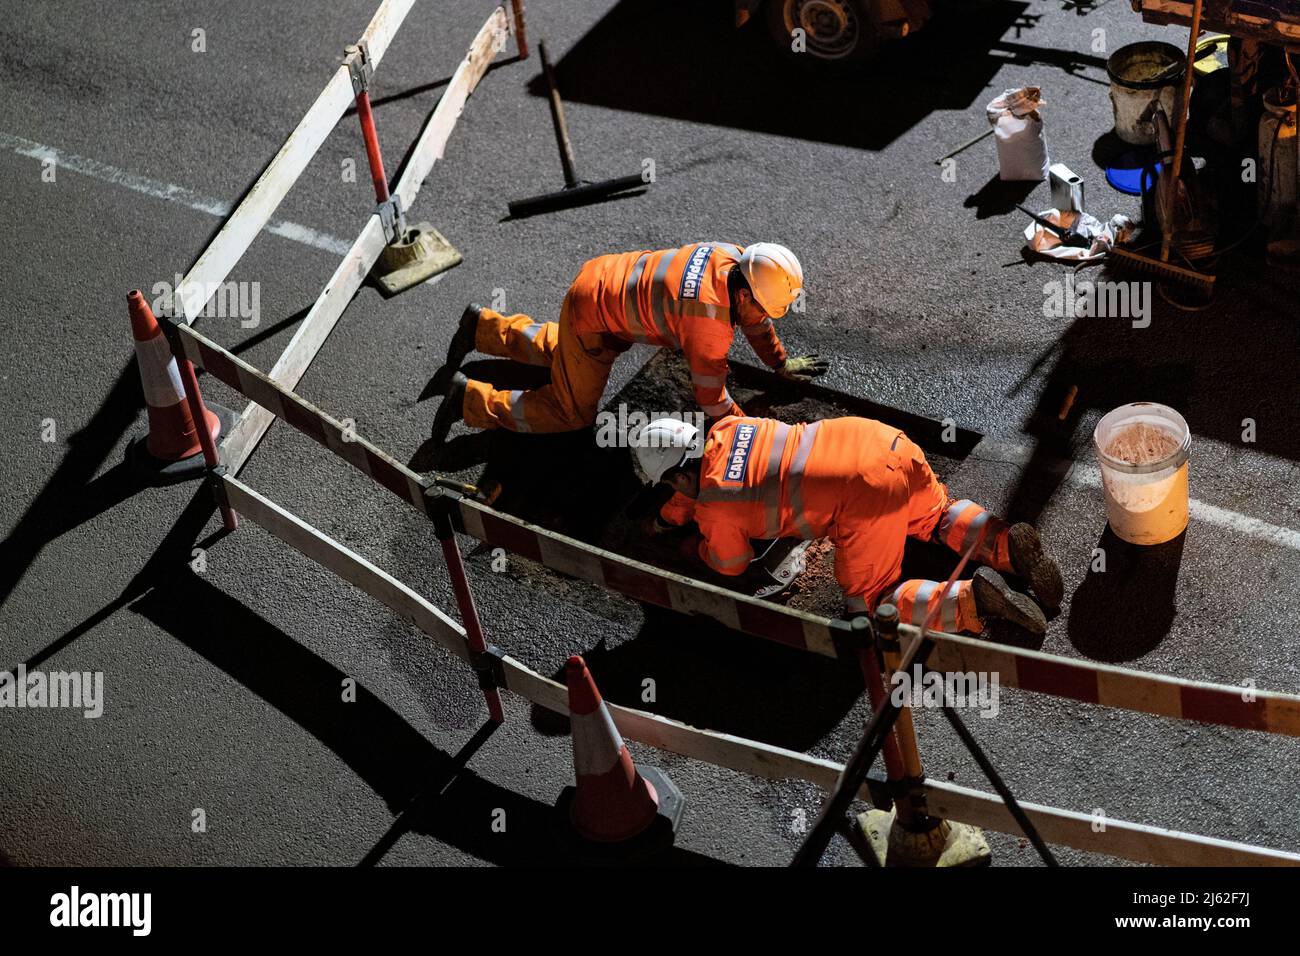 Night time roadworks, repairing a broken manhole cover in the road, in Hertfordshire, UK. Work carried out by contractors Cappagh, on behalf of Thames Water. Photo: David Levenson/Alamy Stock Photo